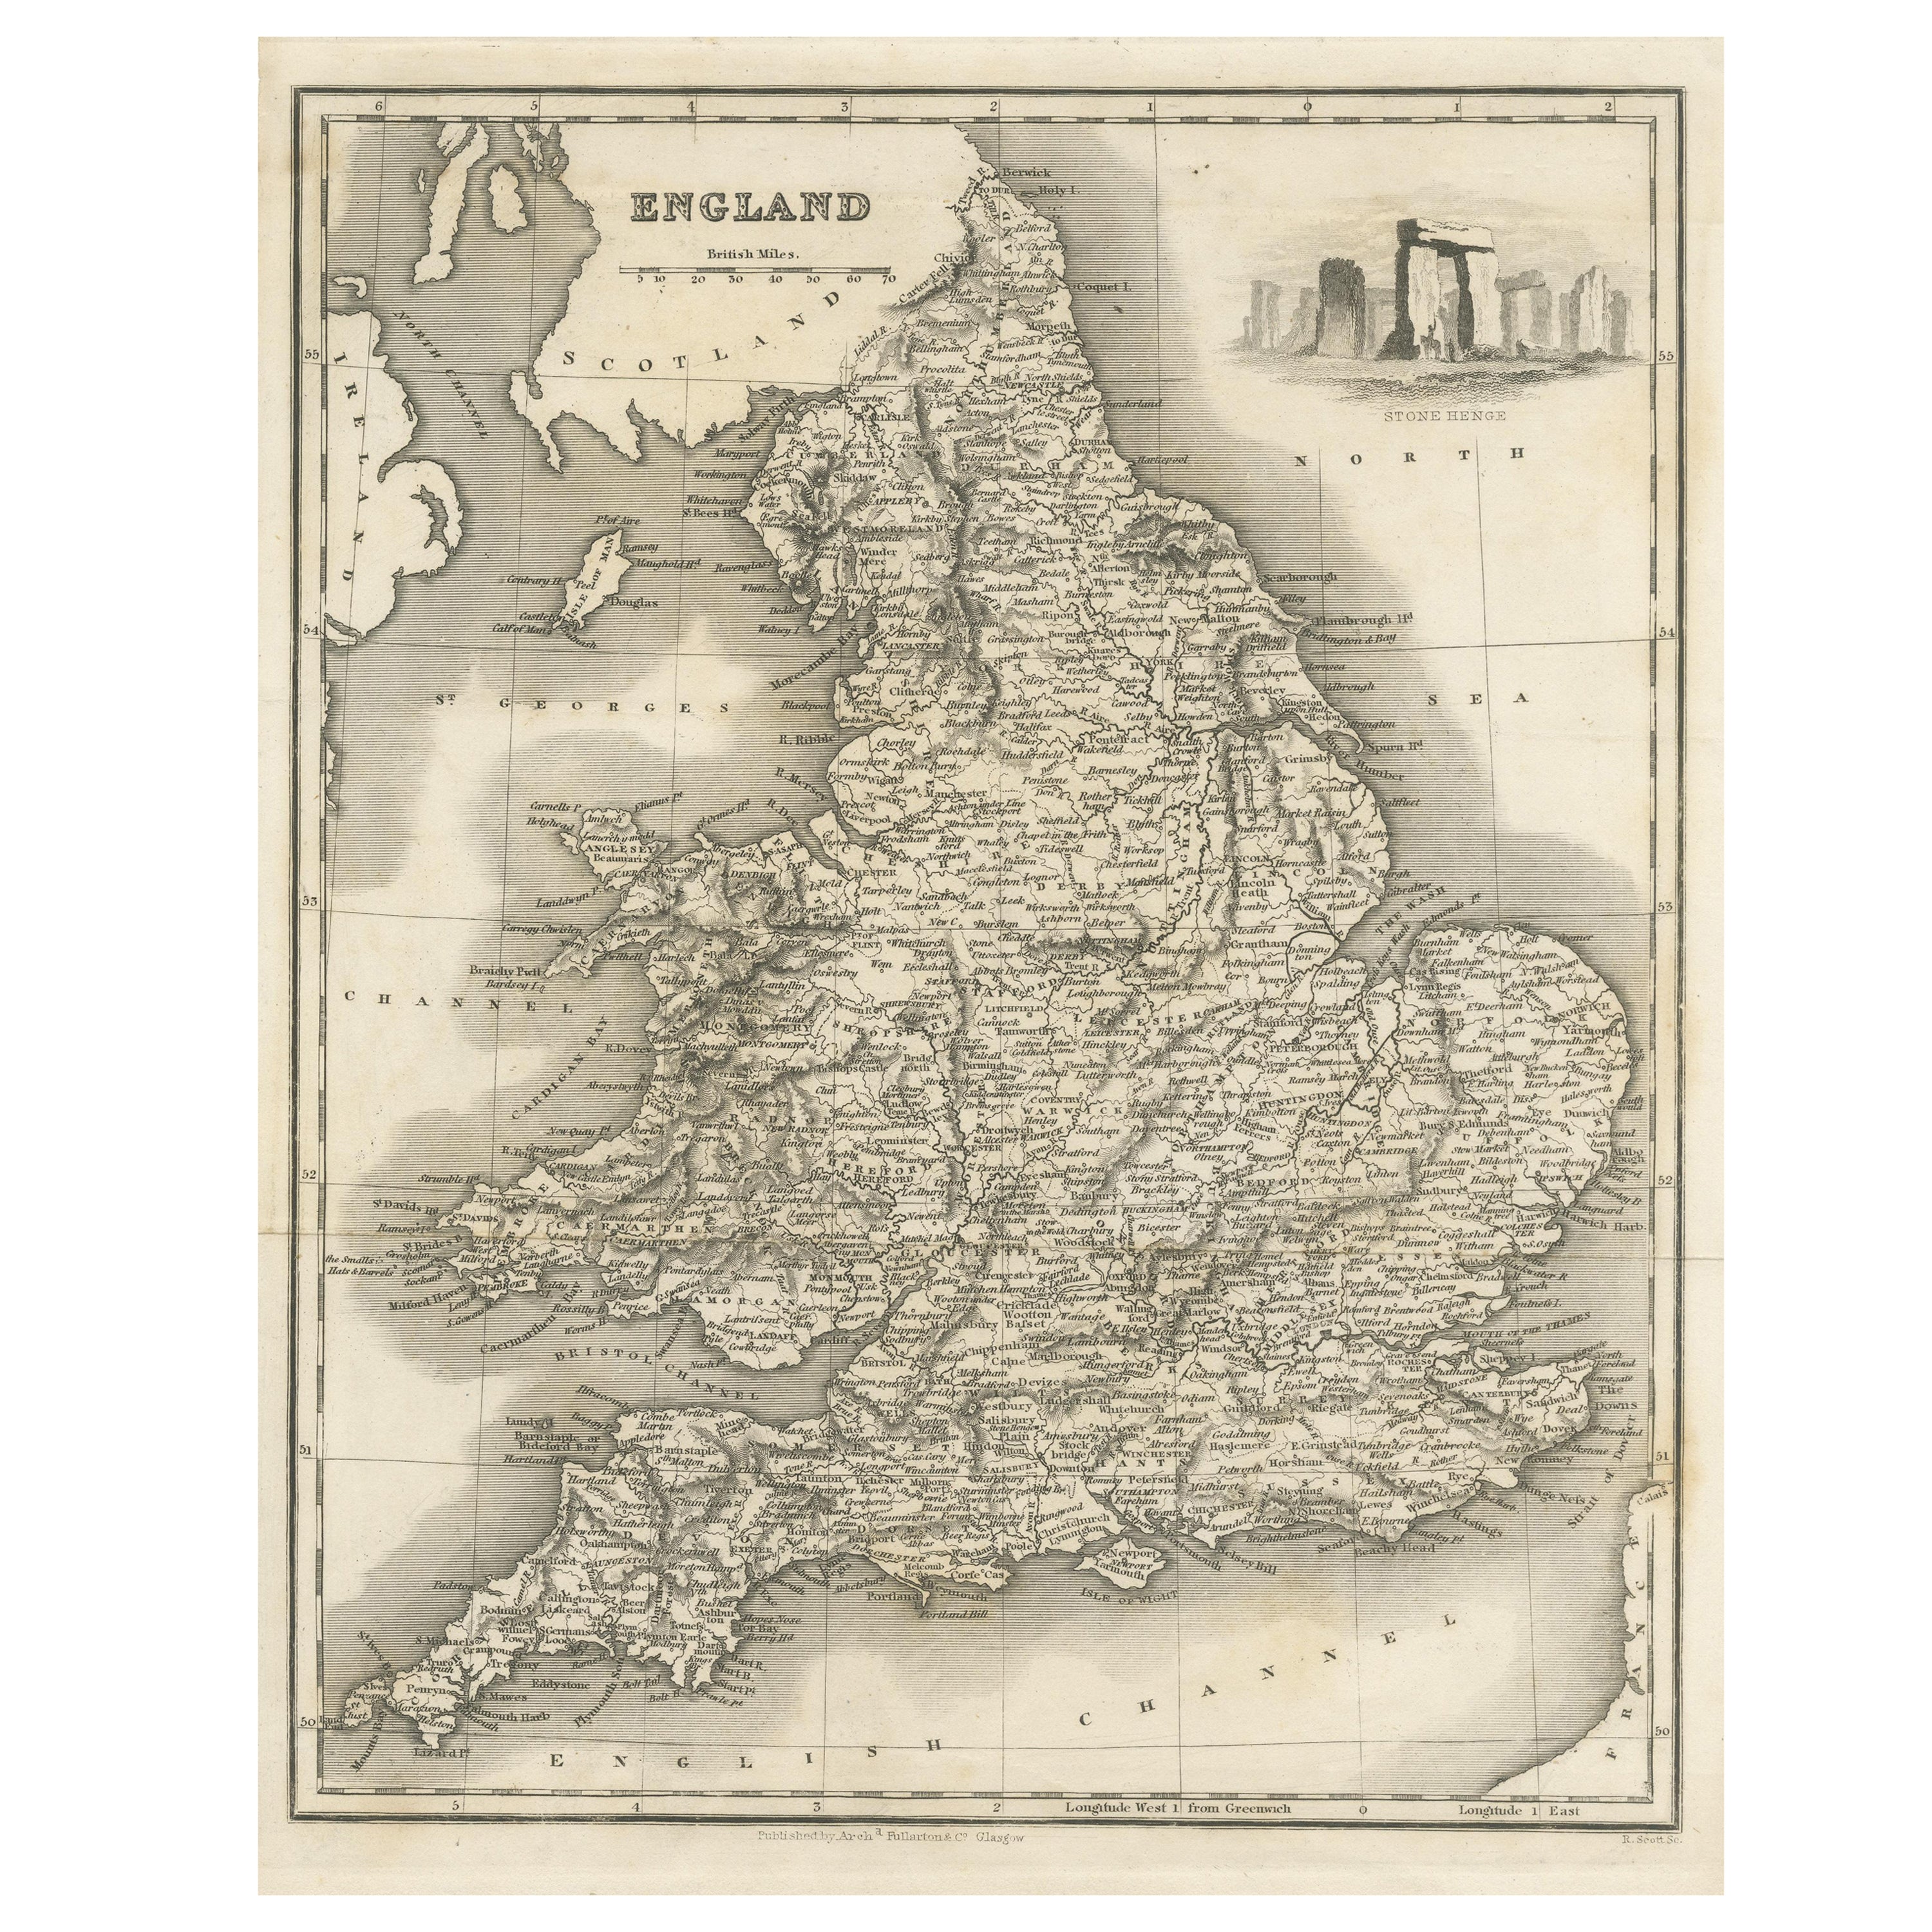 Antique Map of England with Vignette of Stonehenge